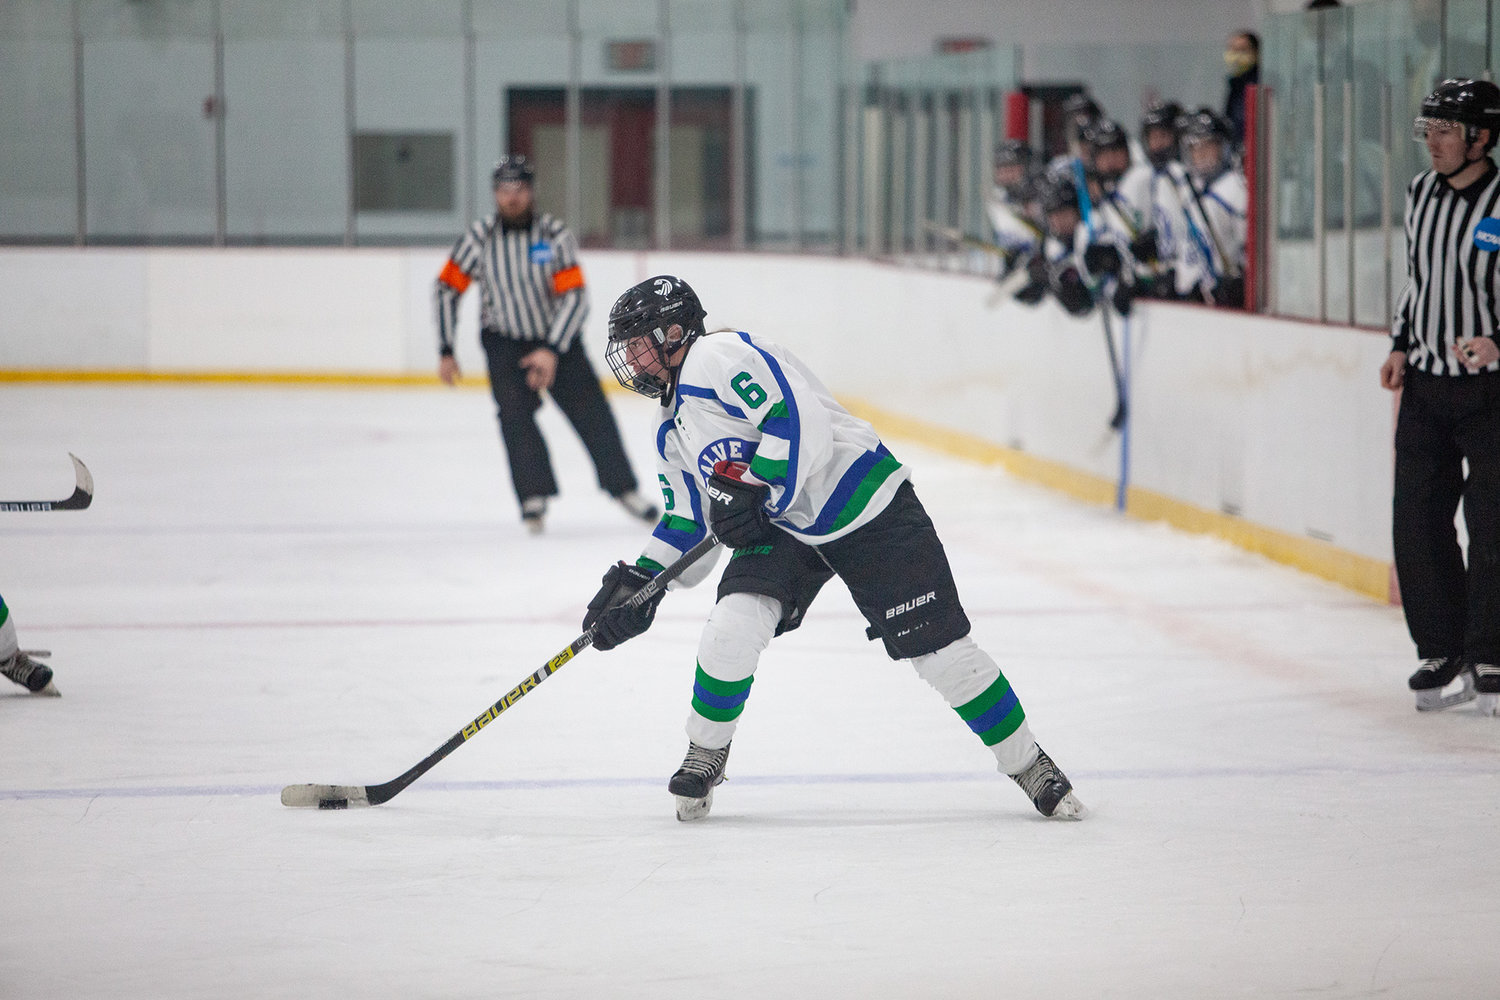 Maddie Cox, a former standout for the East Bay Co-op Girls Hockey team, looks to pass the puck to a teammate during a Salve Regina hockey game.